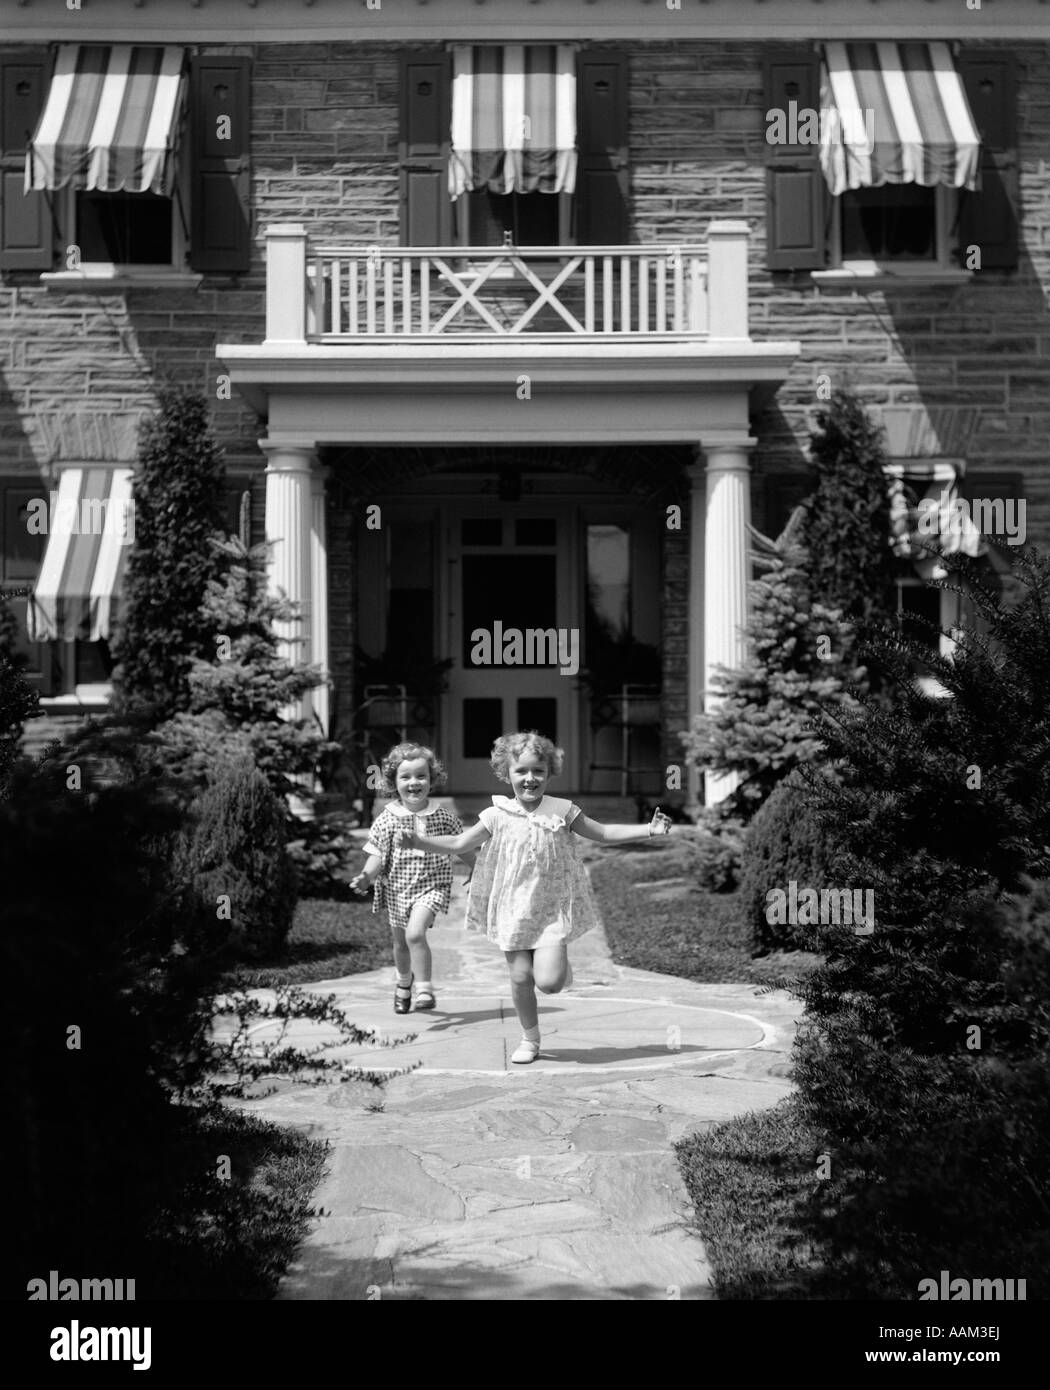 1930s 2 GIRLS IN SUMMER DRESSES RUNNING TO CAMERA ON FLAGSTONE SIDEWALK IN FRONT OF HOUSE Stock Photo